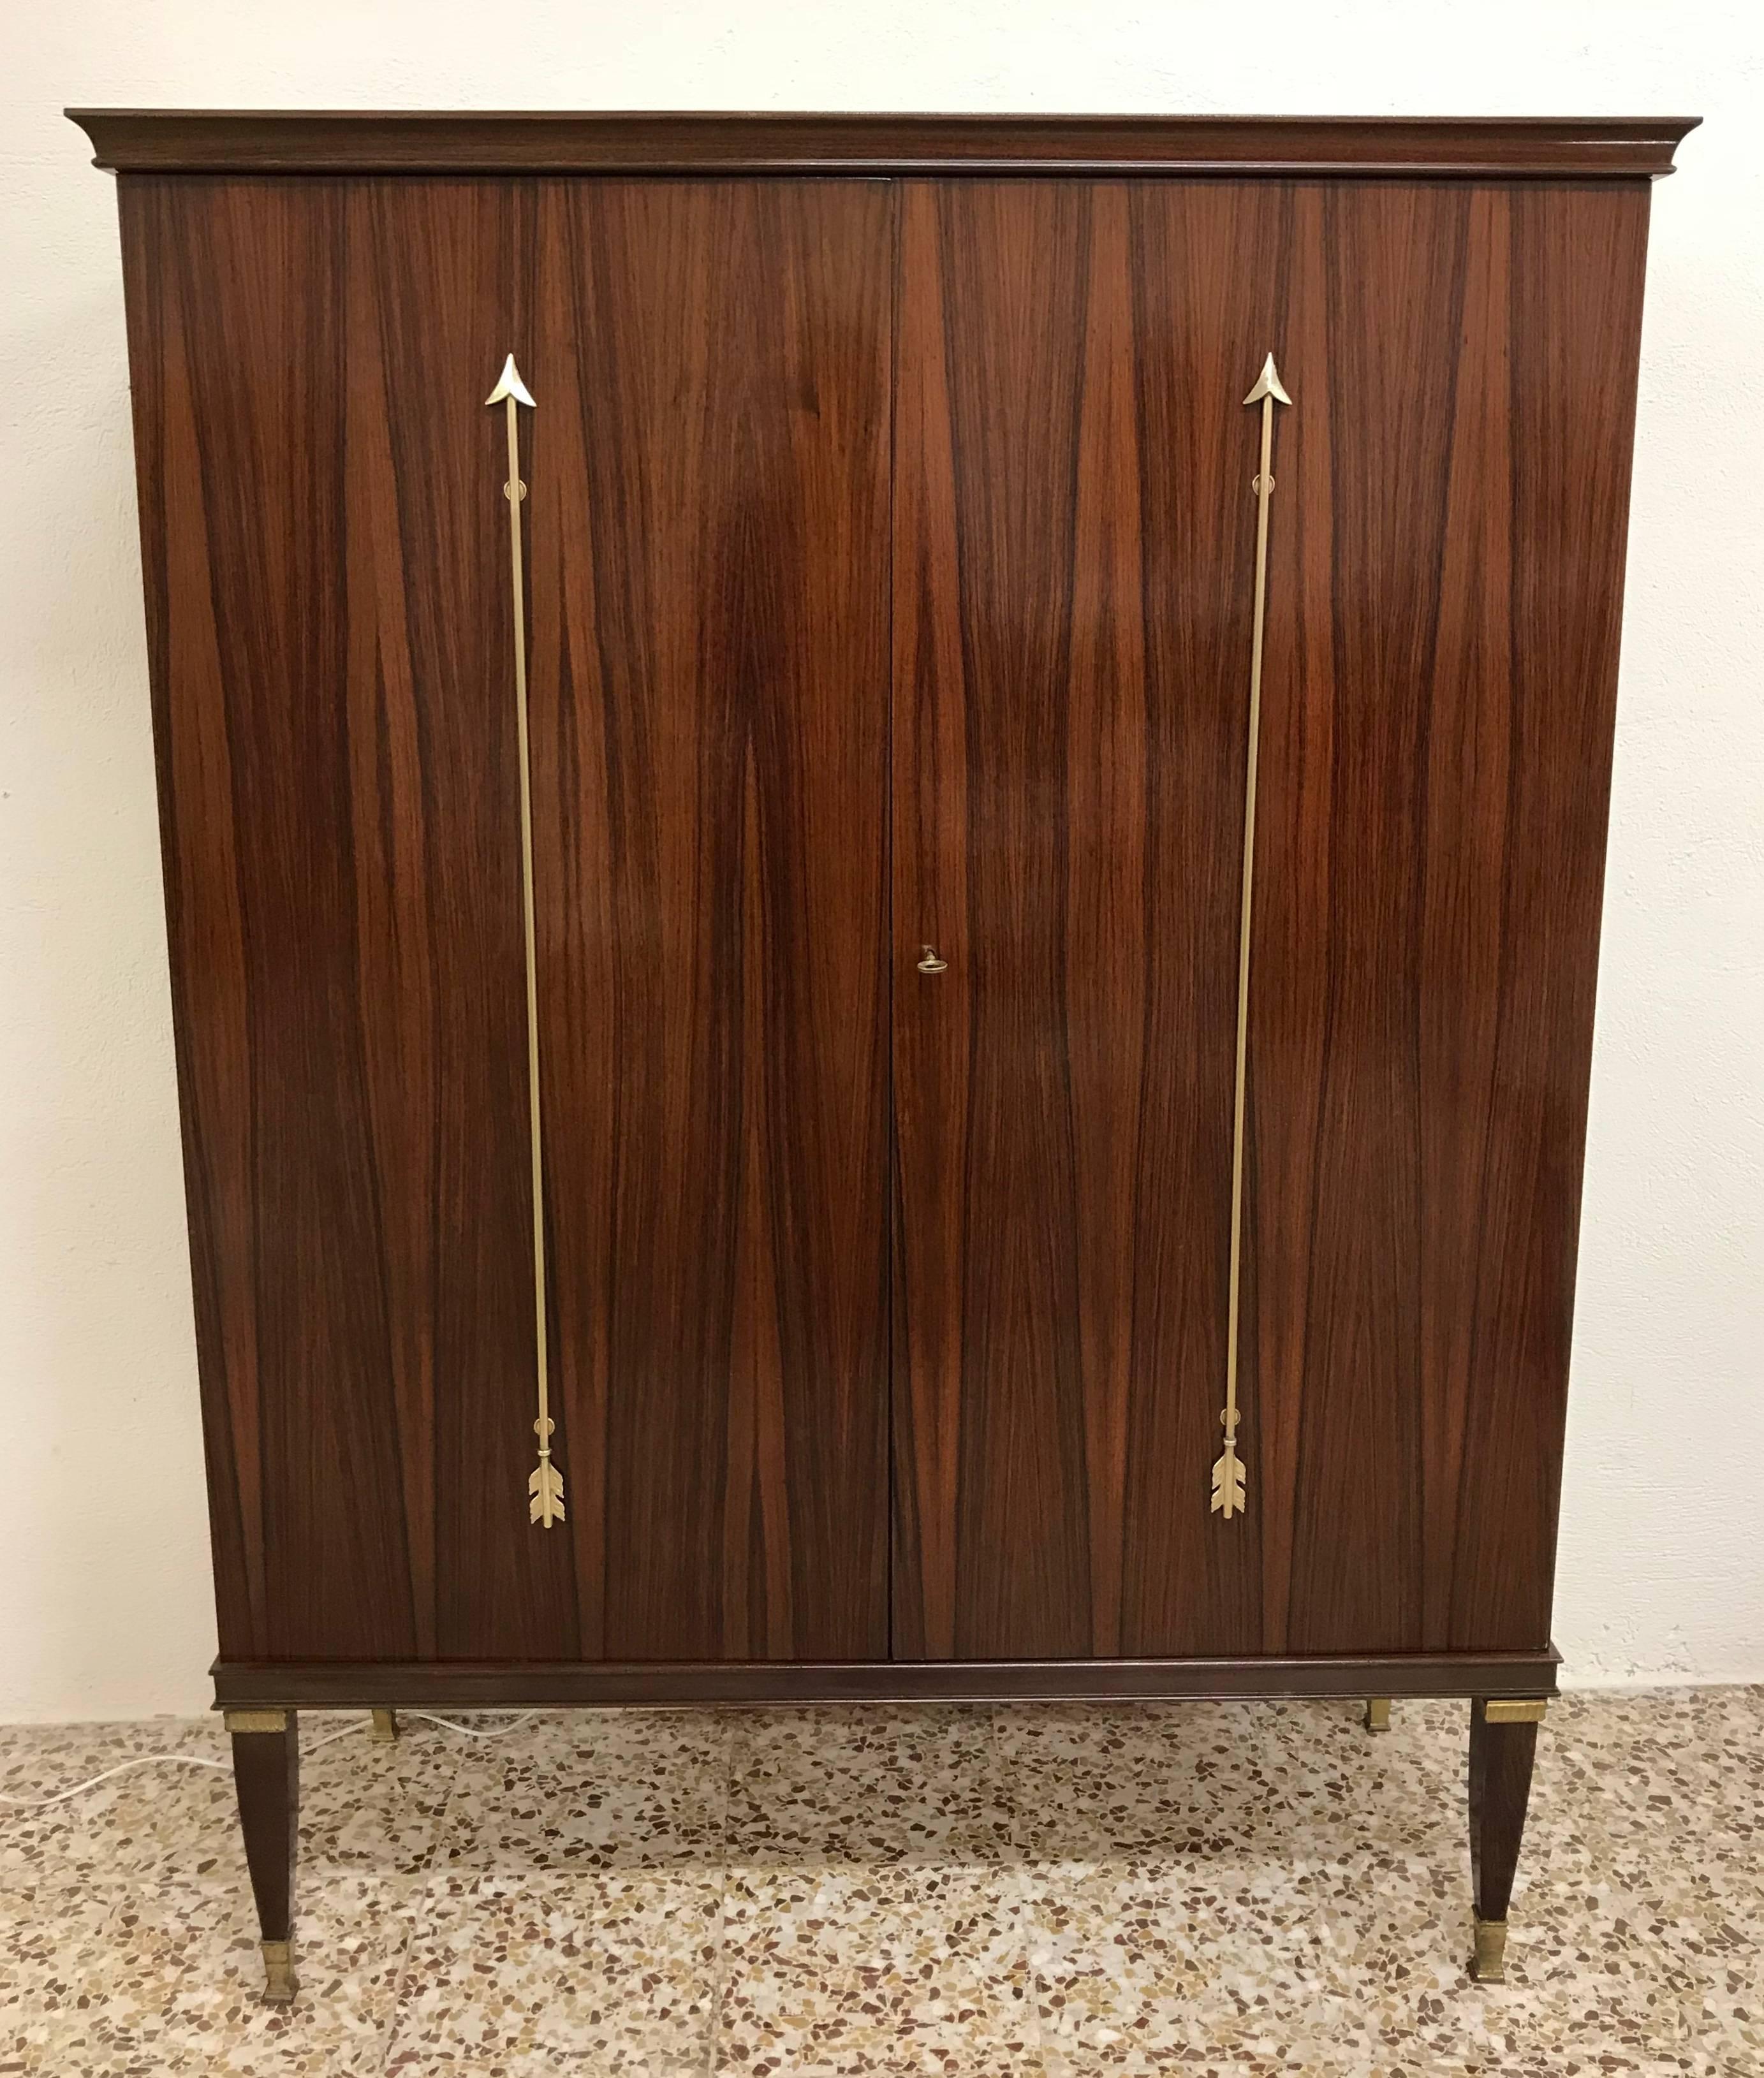 This large bar cabinet was produced in Italy in the 1950s by Paolo Buffa.
The central doors are embellished with two brass arrows.
The interior are finely fitted with drawers and cubbies, which are illuminated by lights switched on by doors opening.